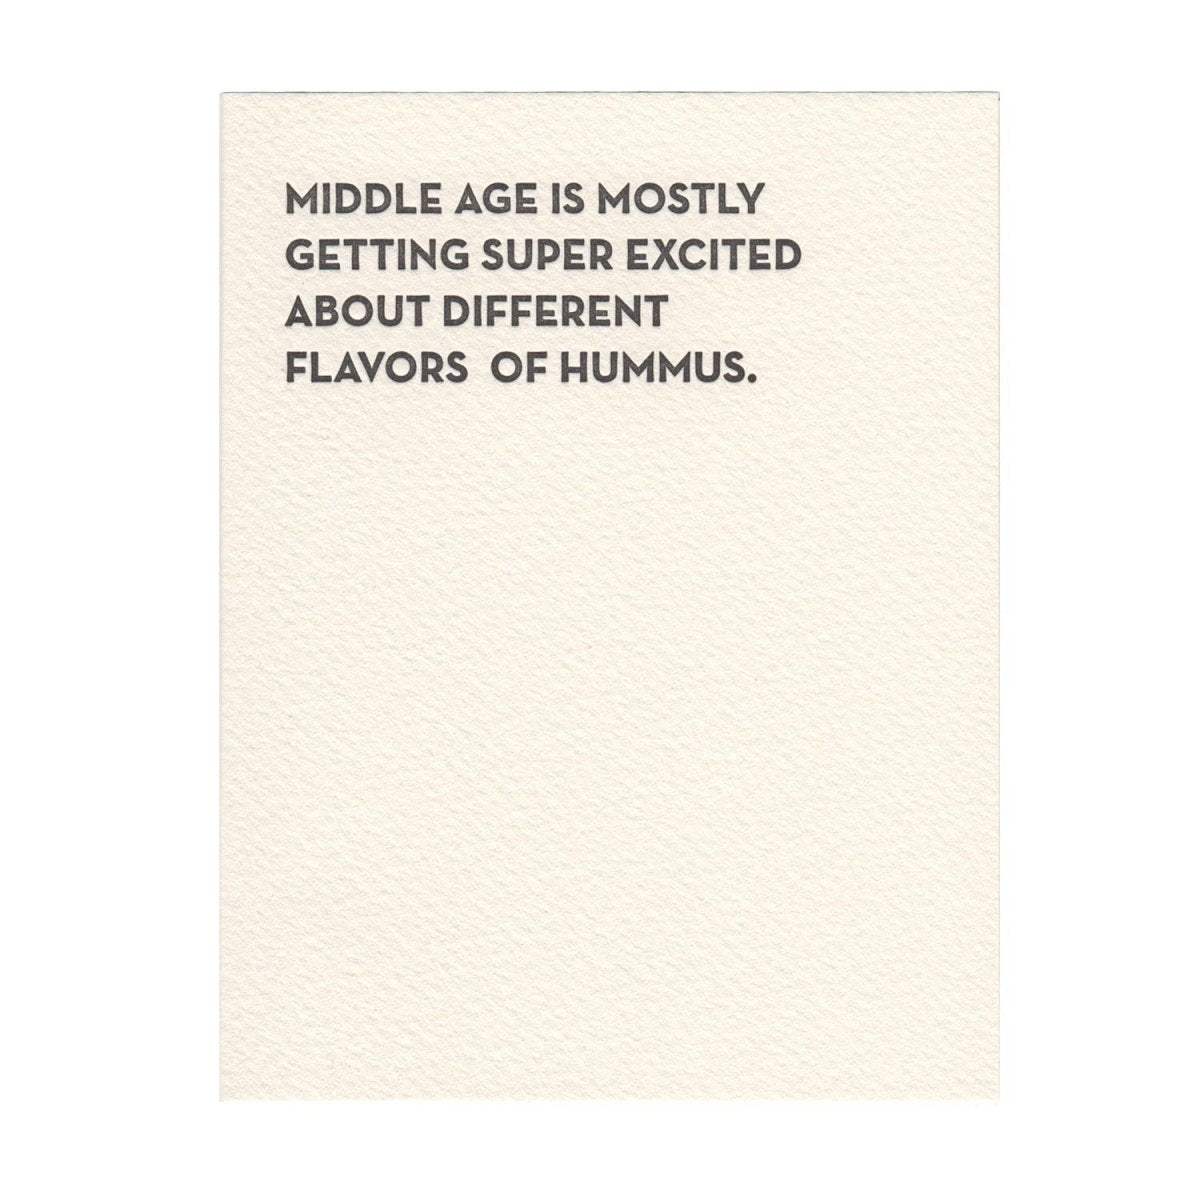 Kraft card with dark black text that reads: "MIDDLE AGE IS MOSTLY GETTING SUPER EXCITED ABOUT DIFFERENT FLAVORS OF HUMMUS." Designed by Sapling Press and printed in Pittsburgh, PA.